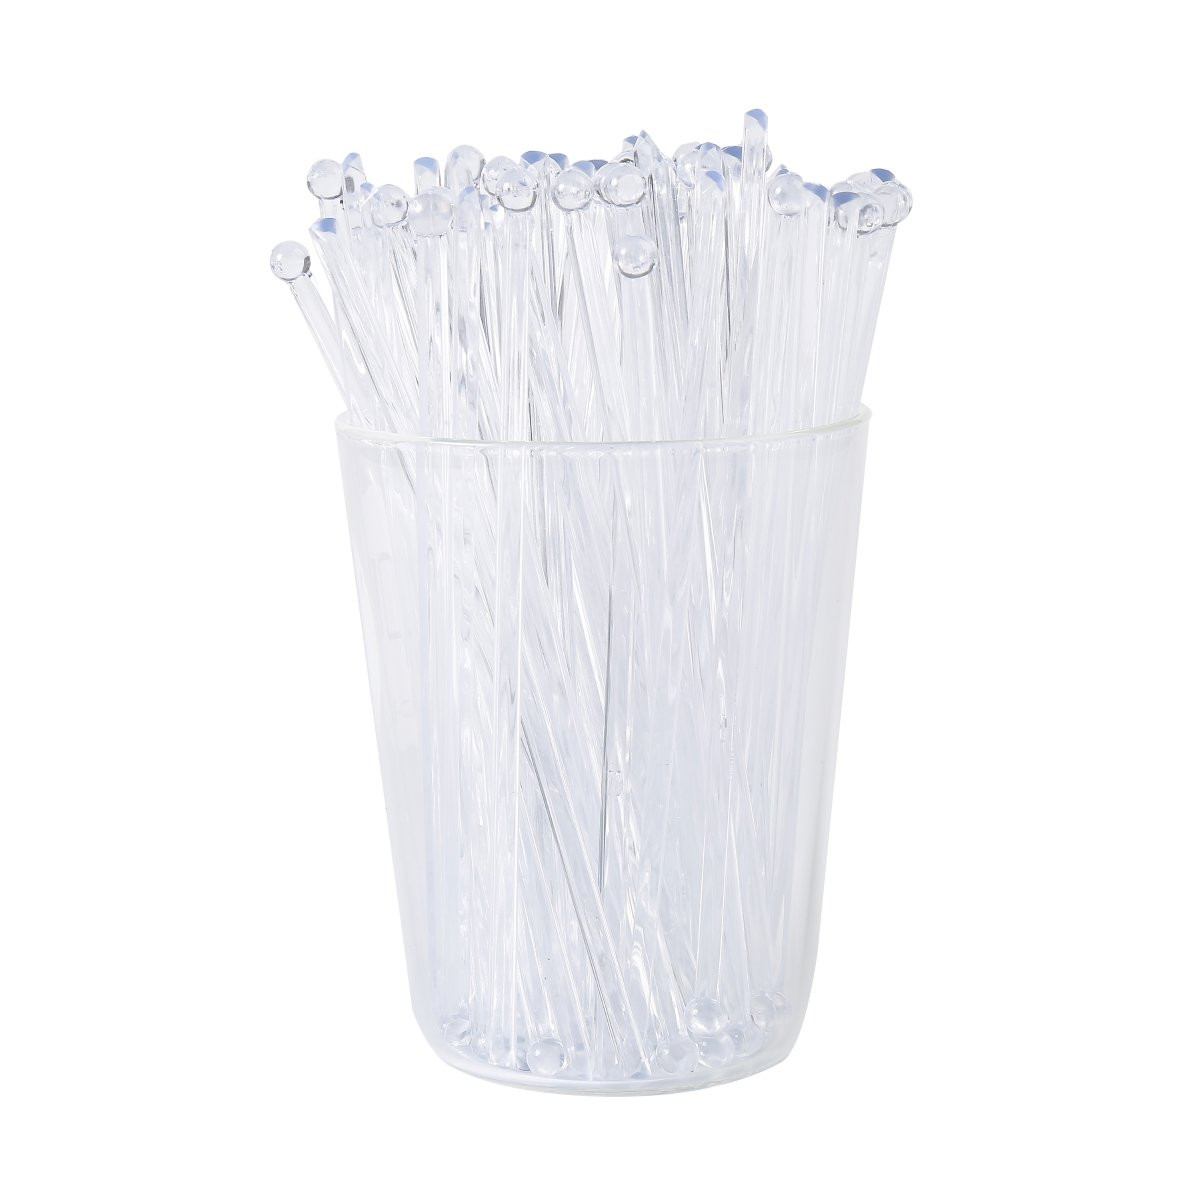 18 Wonderful 6 Inch Cylinder Vases wholesale 2024 free download 6 inch cylinder vases wholesale of cheap 8 inch plastic ball find 8 inch plastic ball deals on line at intended for get quotations ac2b7 gmark 6 inch plastic round top swizzle sticks 100 ct 